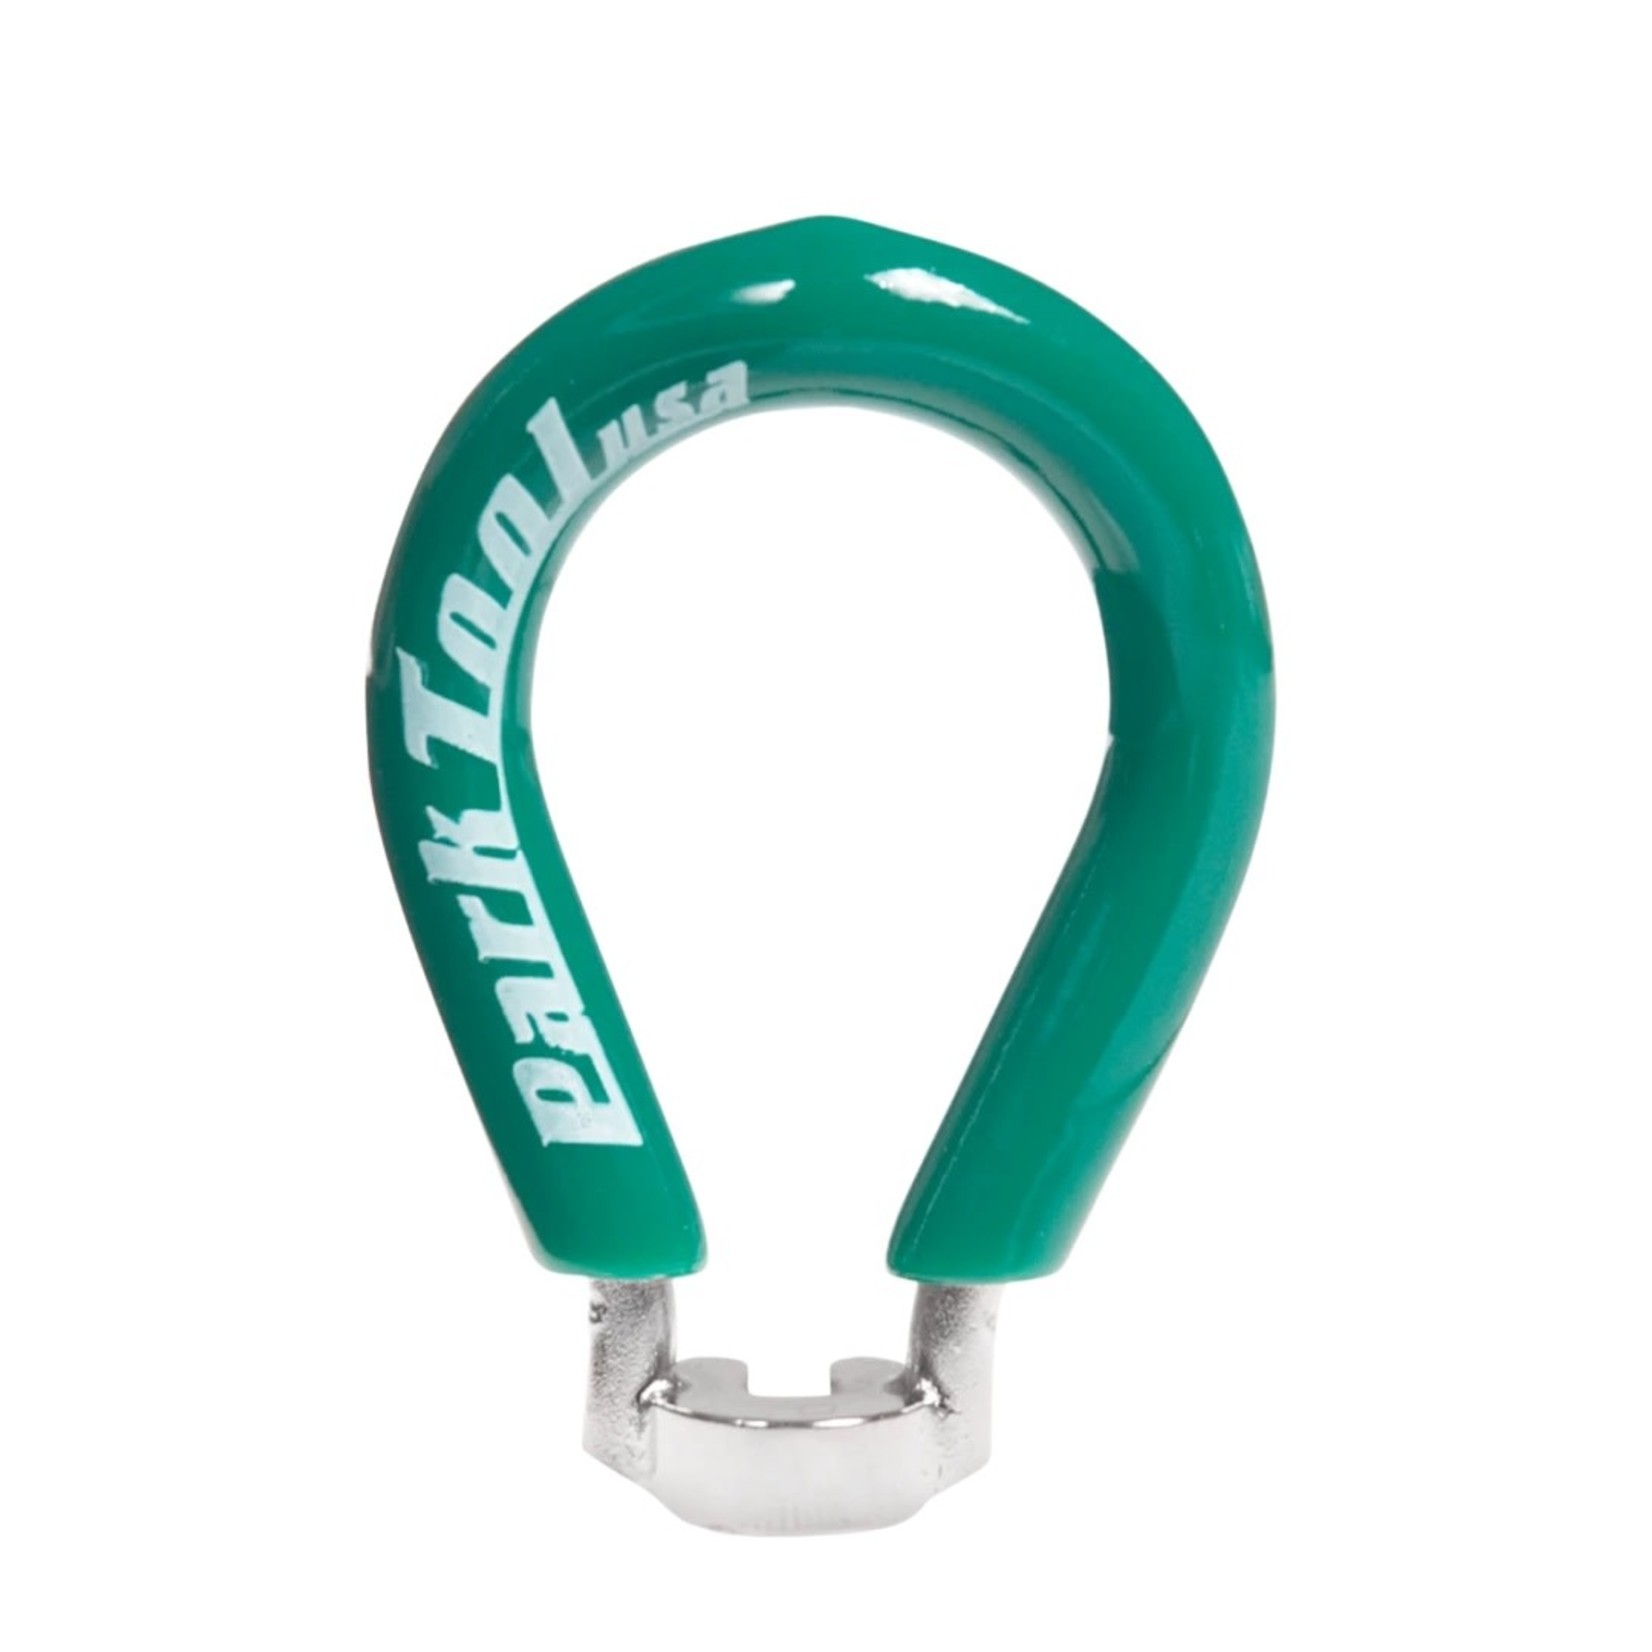 PARK TOOL Park Tool SW-1 Spoke Wrench, 3.30mm/0.130", Green